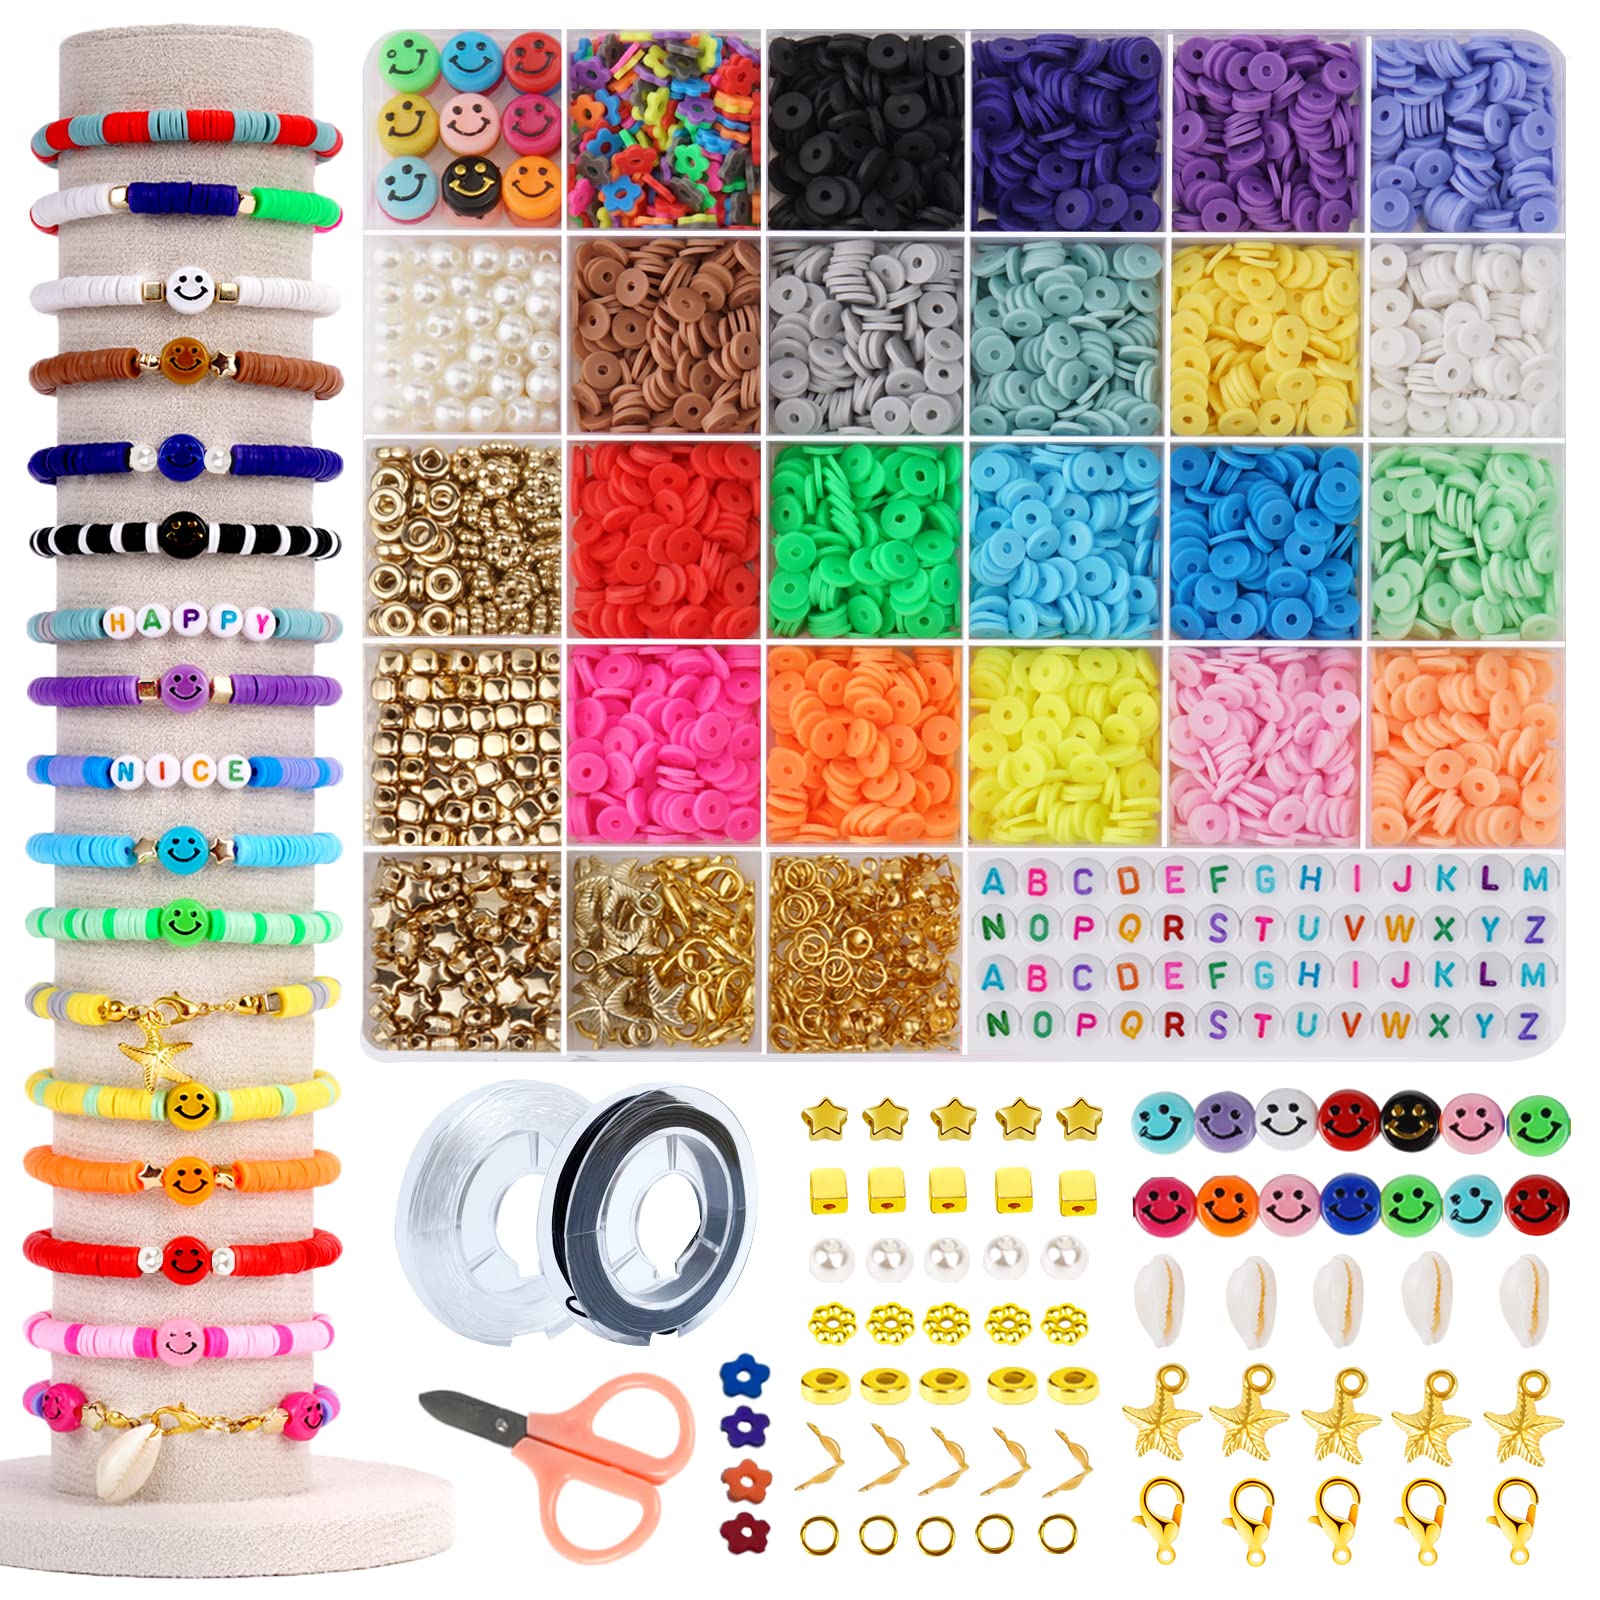 LZOUOWO 5300 Clay Beads for Bracelets Making Aesthetic Kit with Smiley Face  Beads Polymer Clay Flat Beads for Bracelets Set Heishi disc Beads and  Letter Beads for Girls Ages 8-12 5300pcs